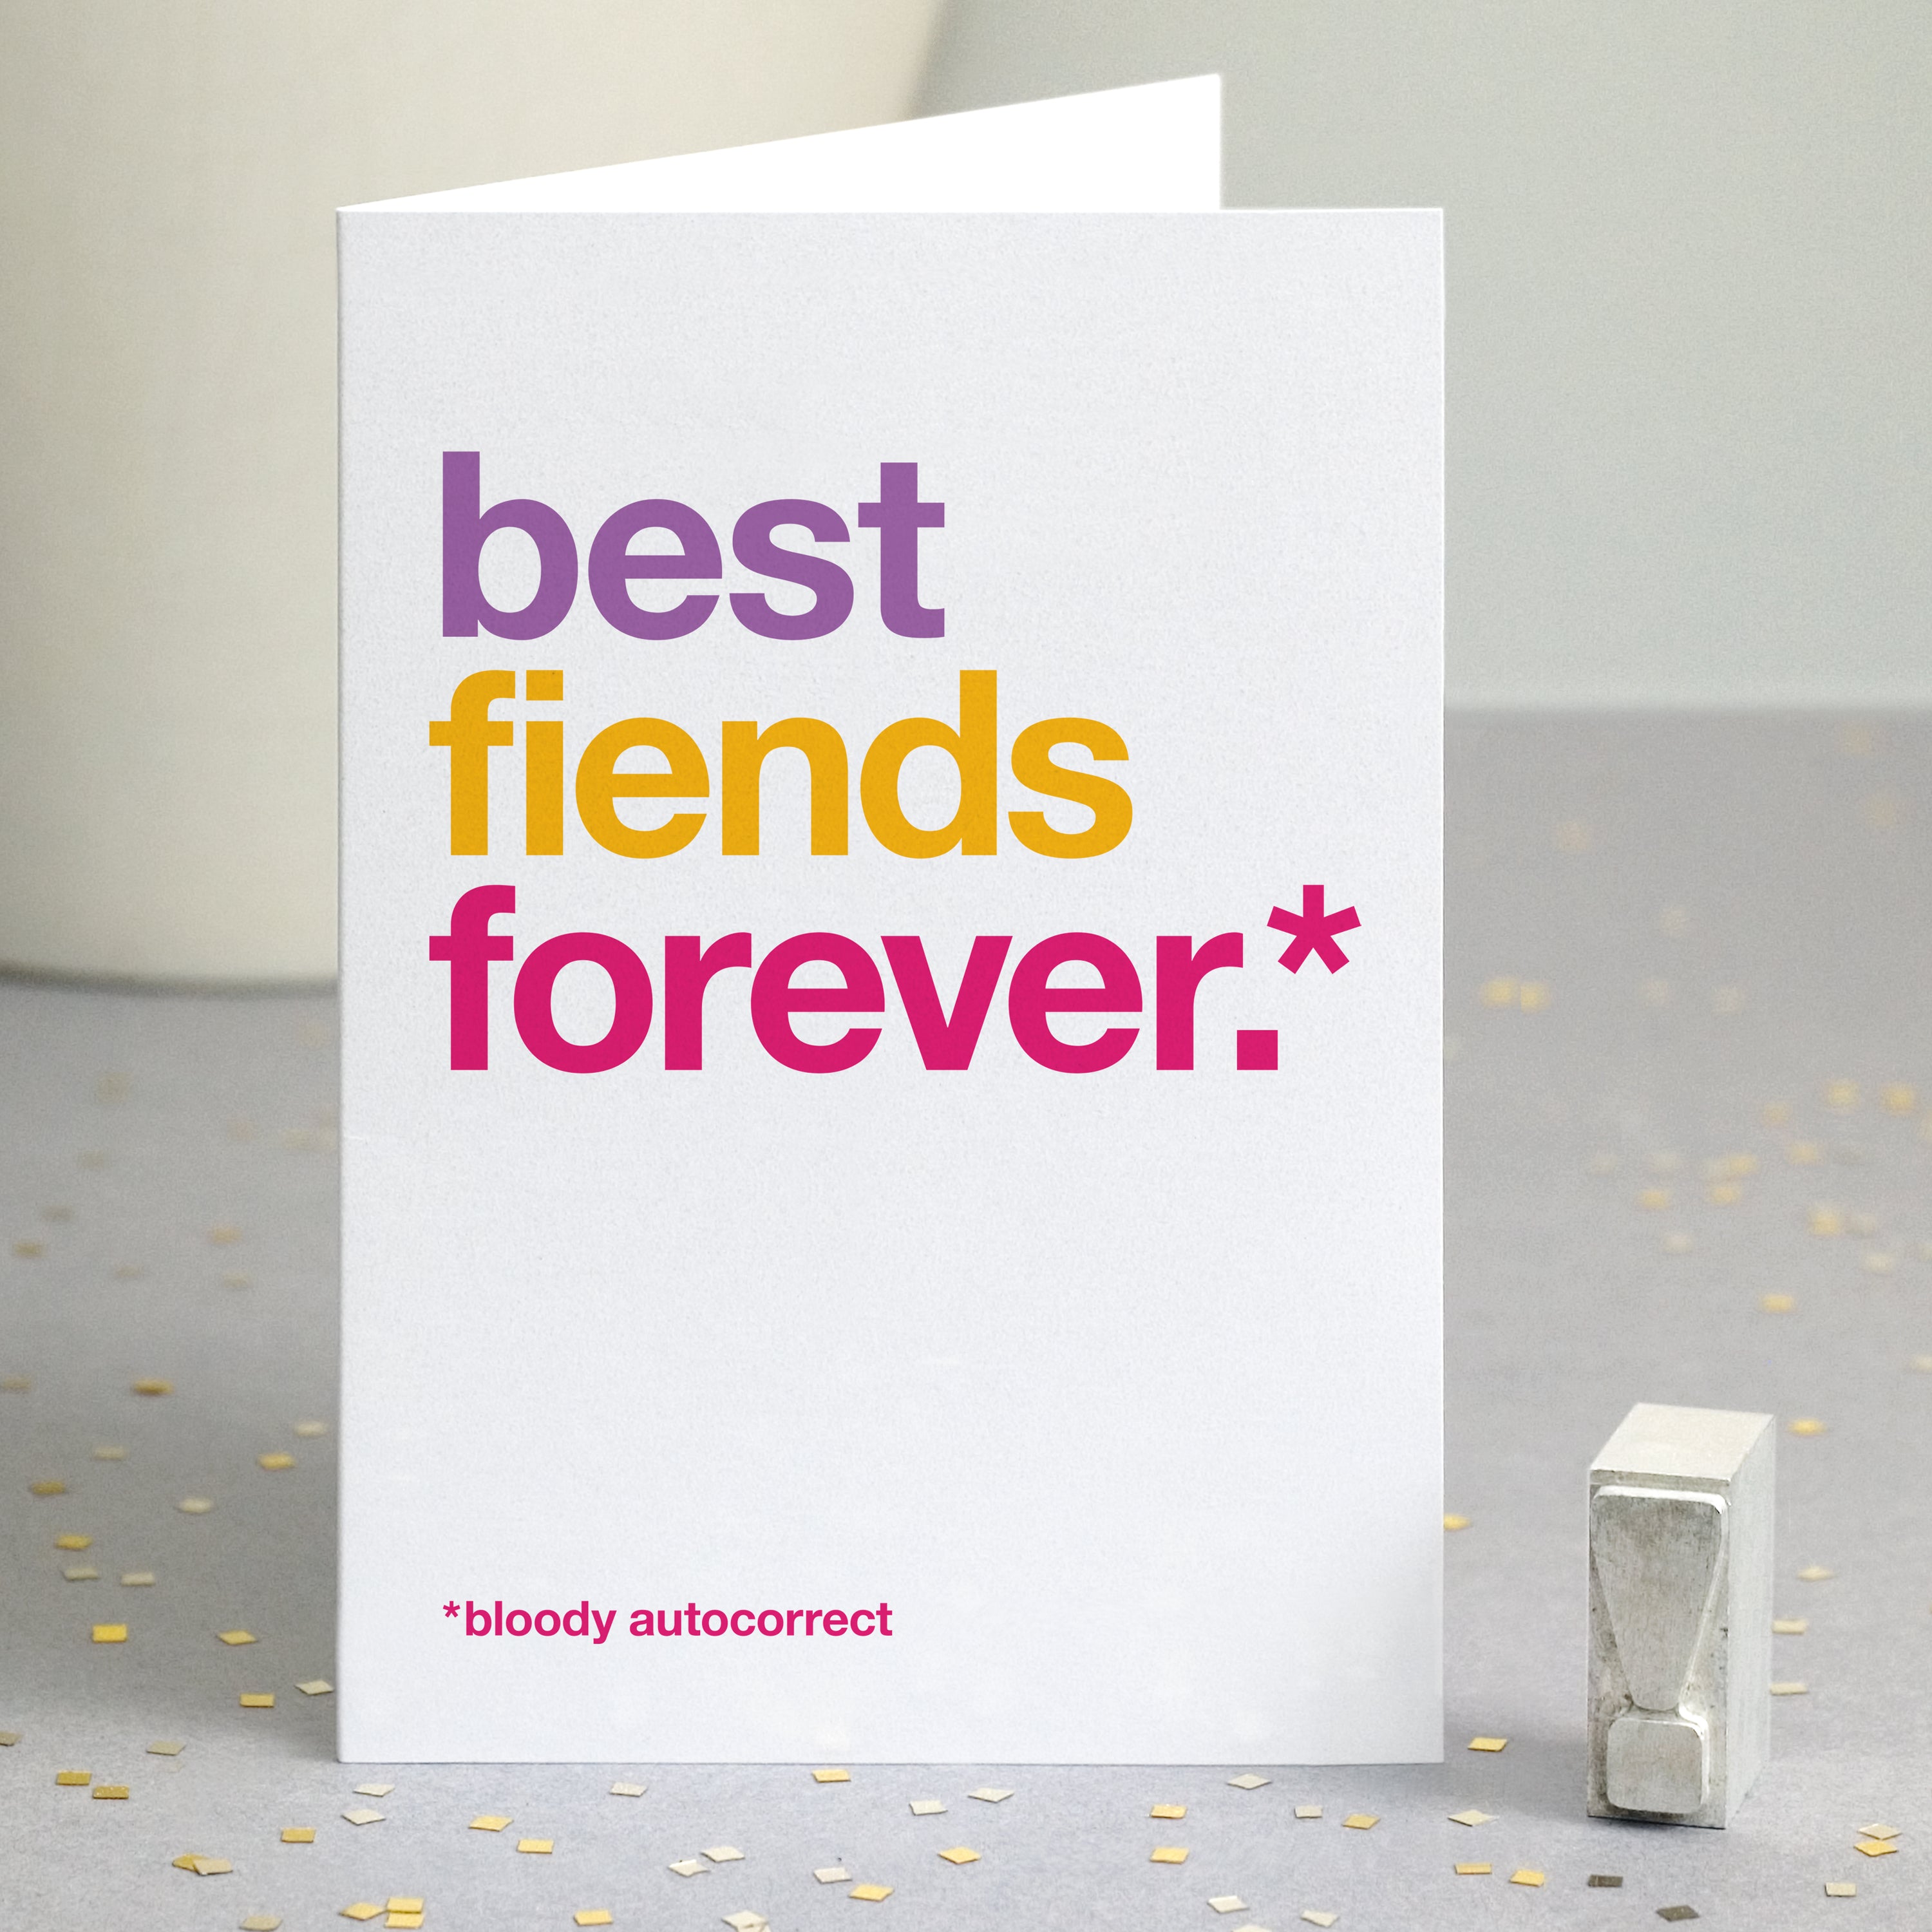 Autocorrect Fiends Funny Card For Best Friend Wordplay Design Reviews On Judgeme